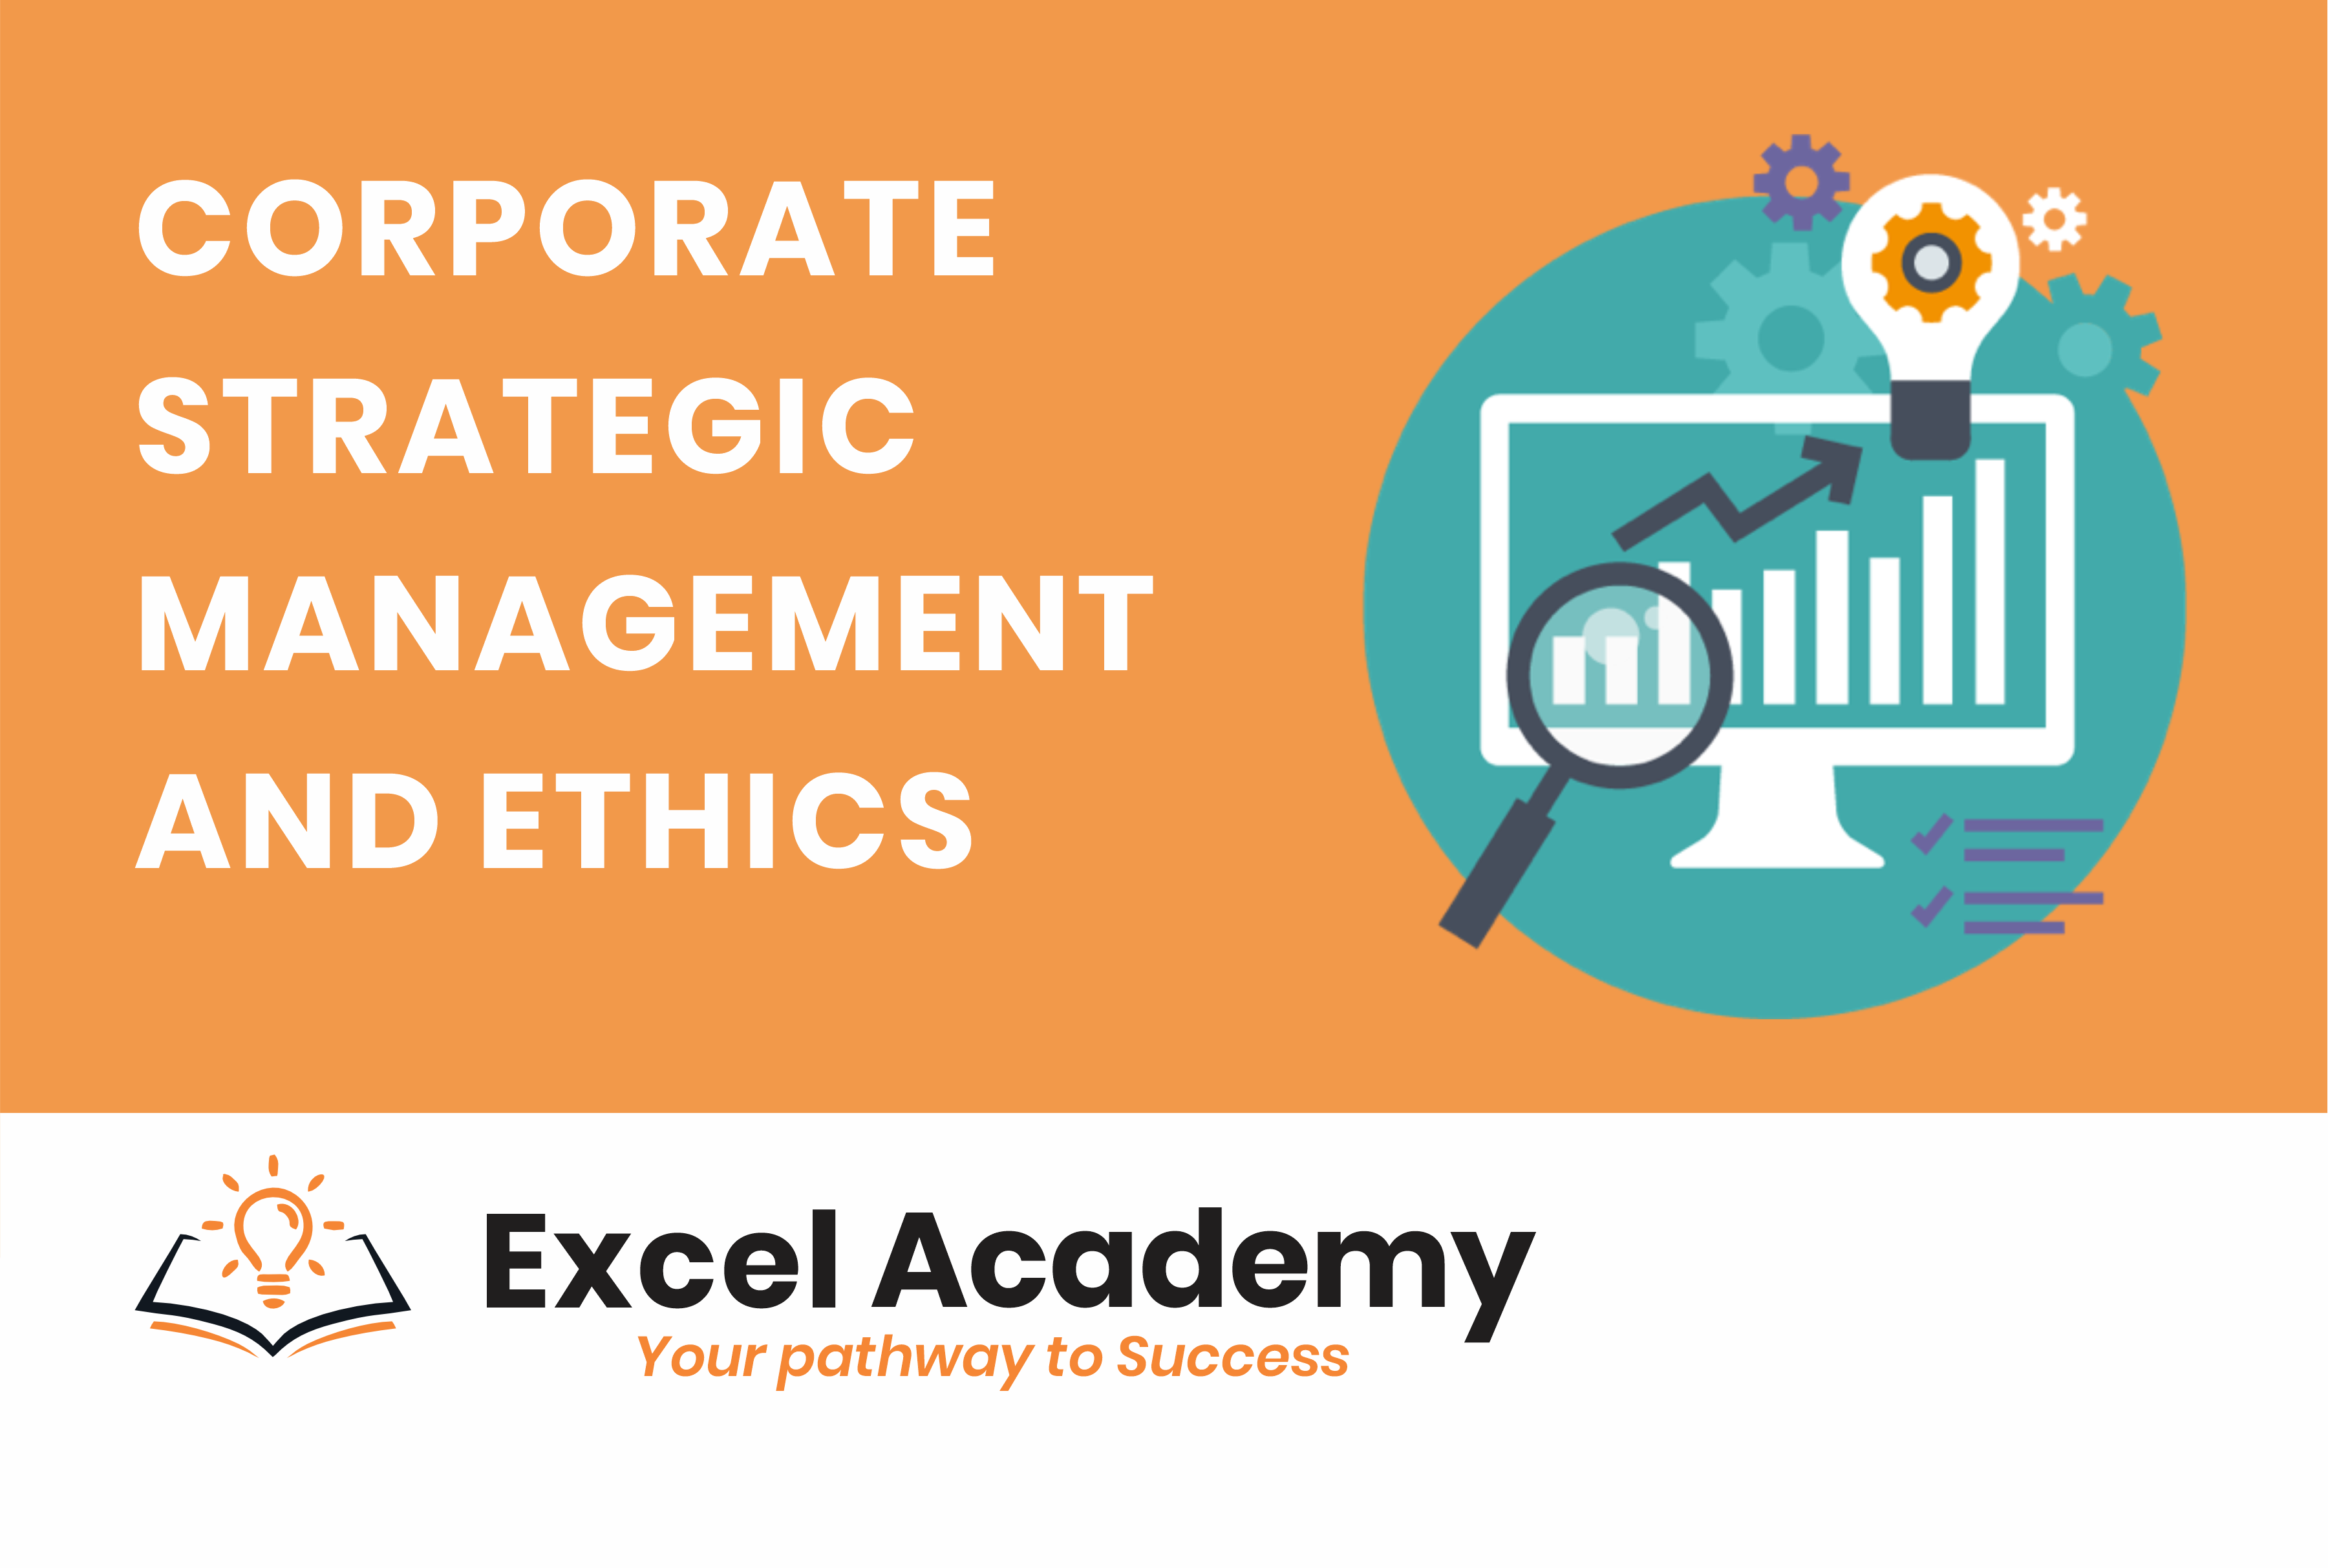 ICAN – Corporate Strategic Management and Ethics (Revision)